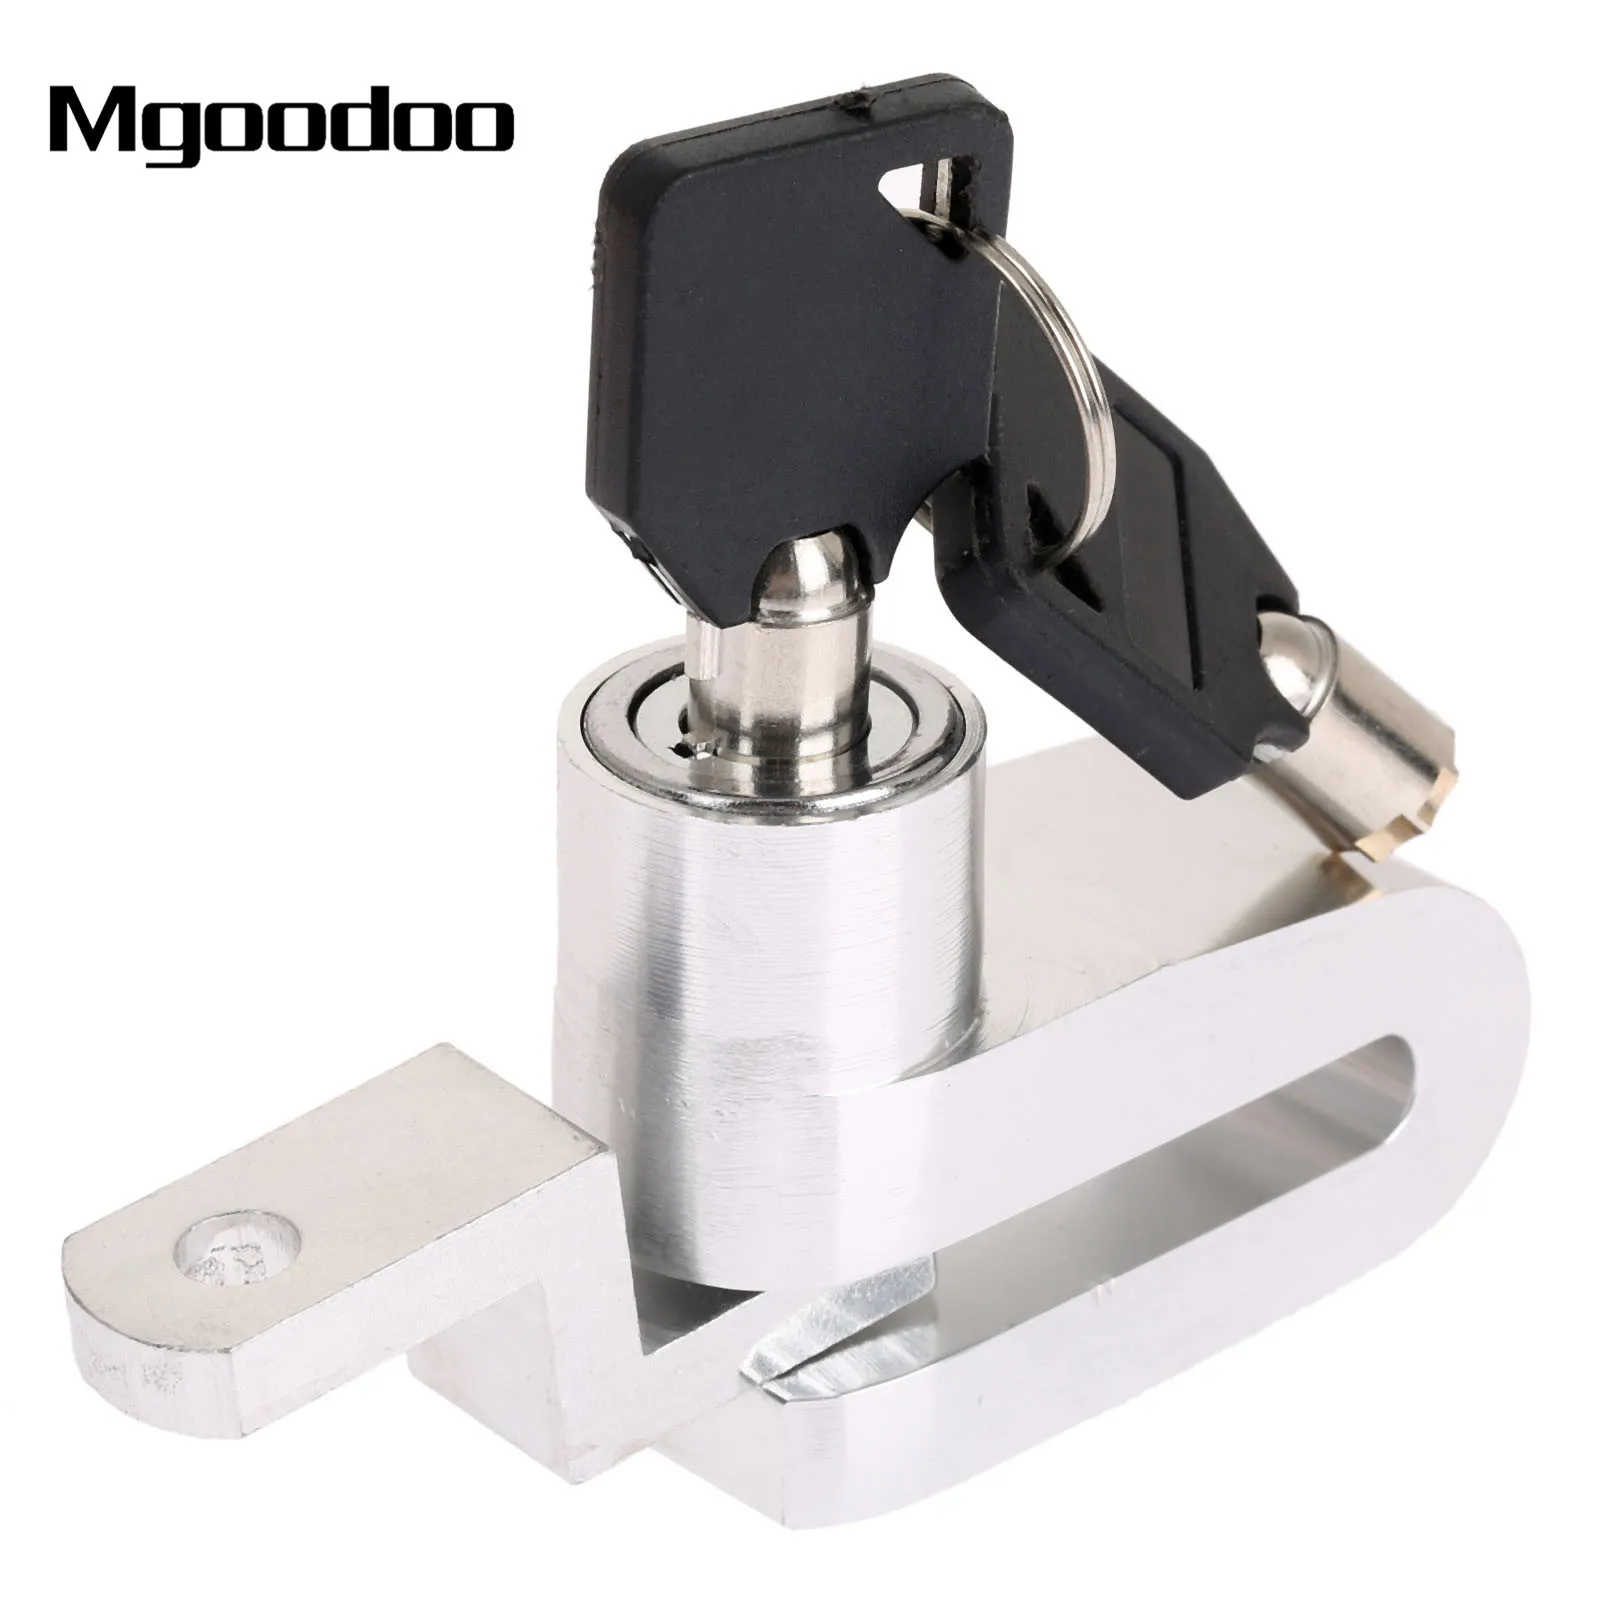 

Mgoodoo Motorcycle Bike Bicycle Disc Disk Brake Lock Security Anti-theft Alarm Lock Motorbike Theft Protection Stainless Alloy